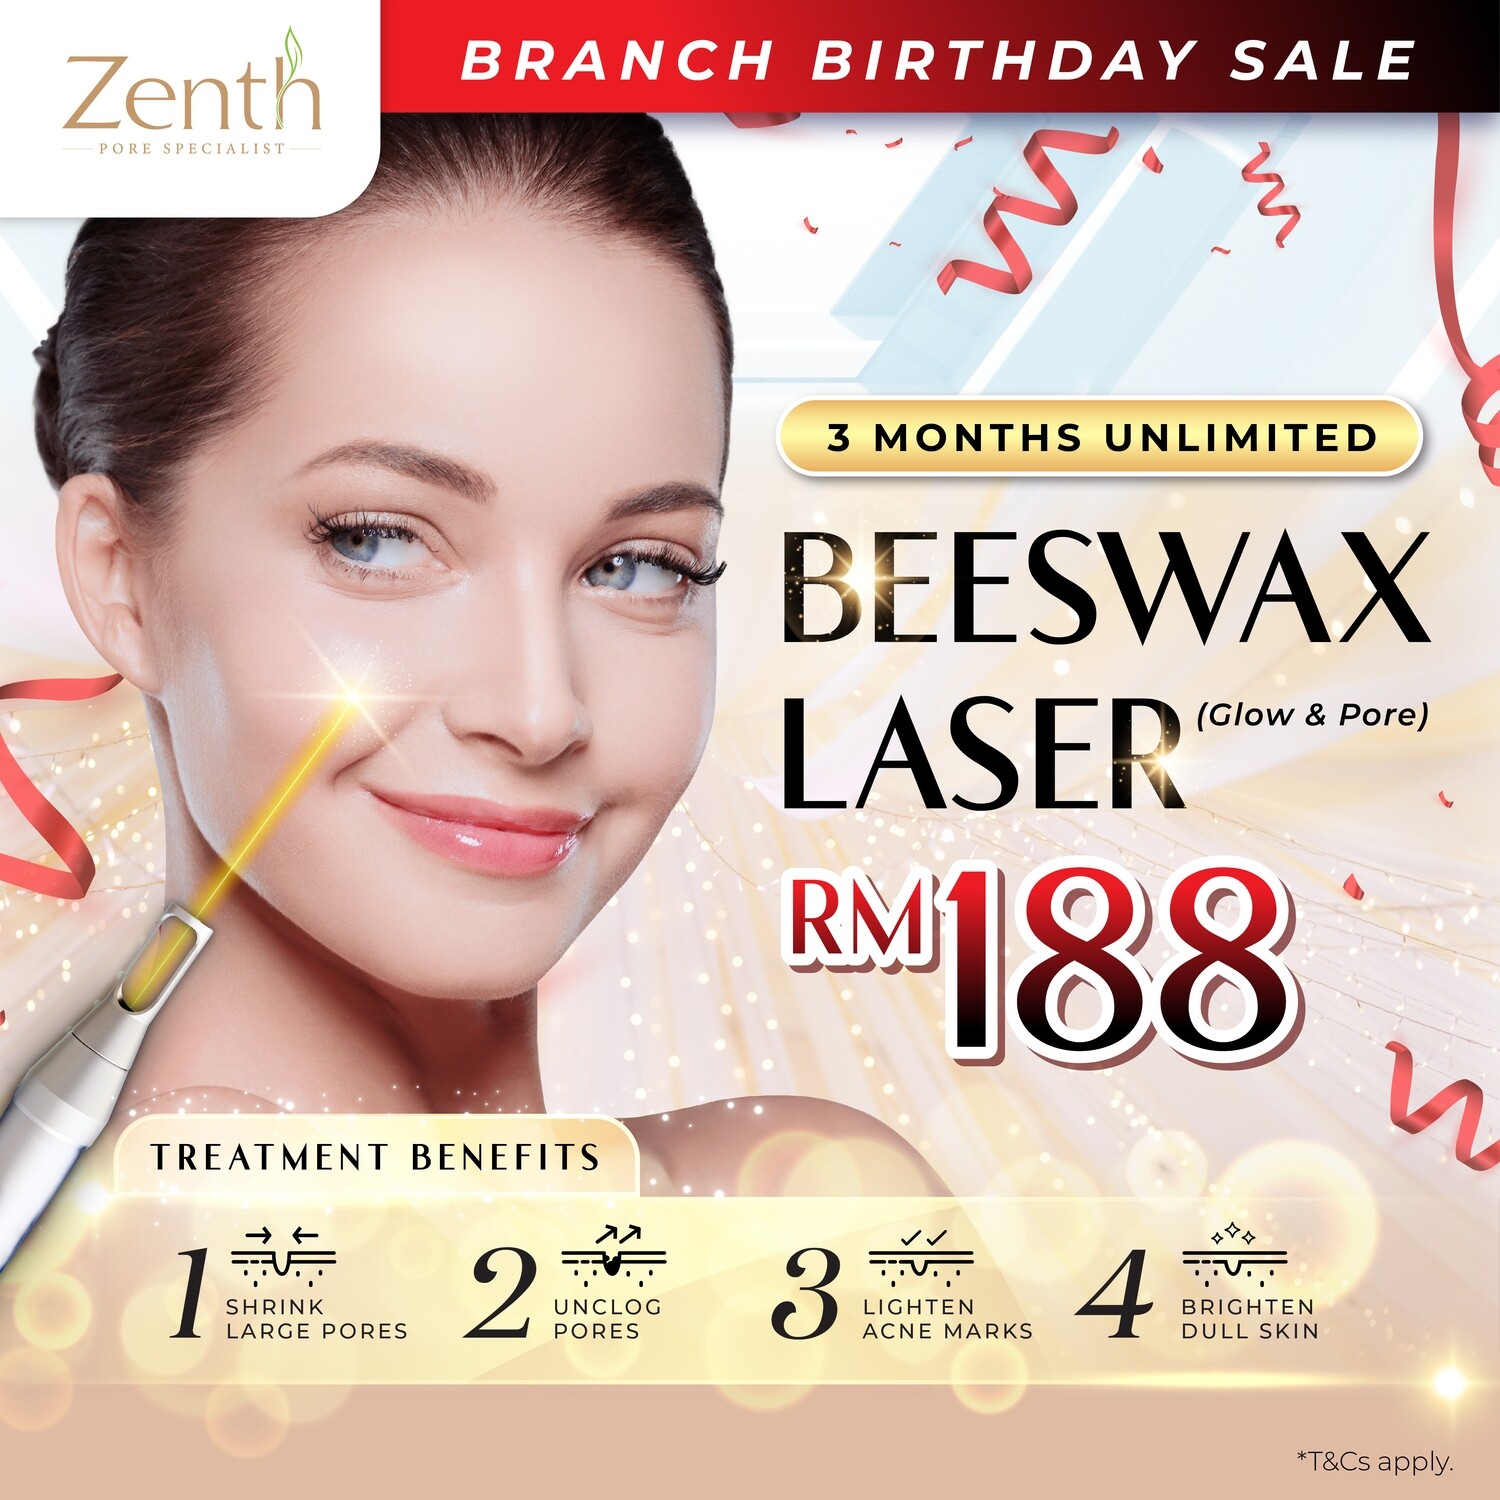 3-Months UNLIMITED Beeswax Laser (Glow & Pore)